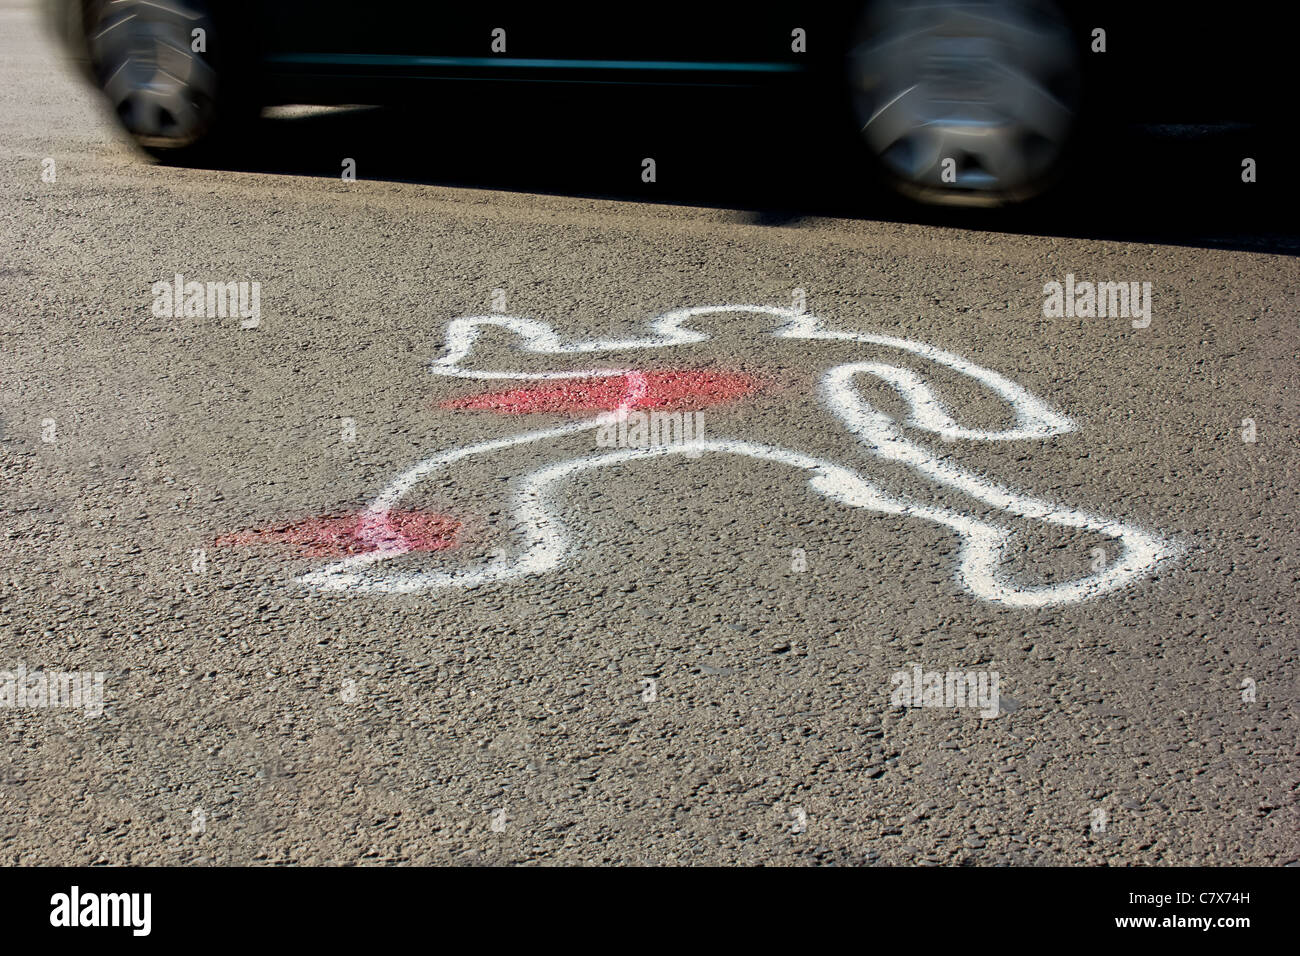 man hit by car Stock Photo